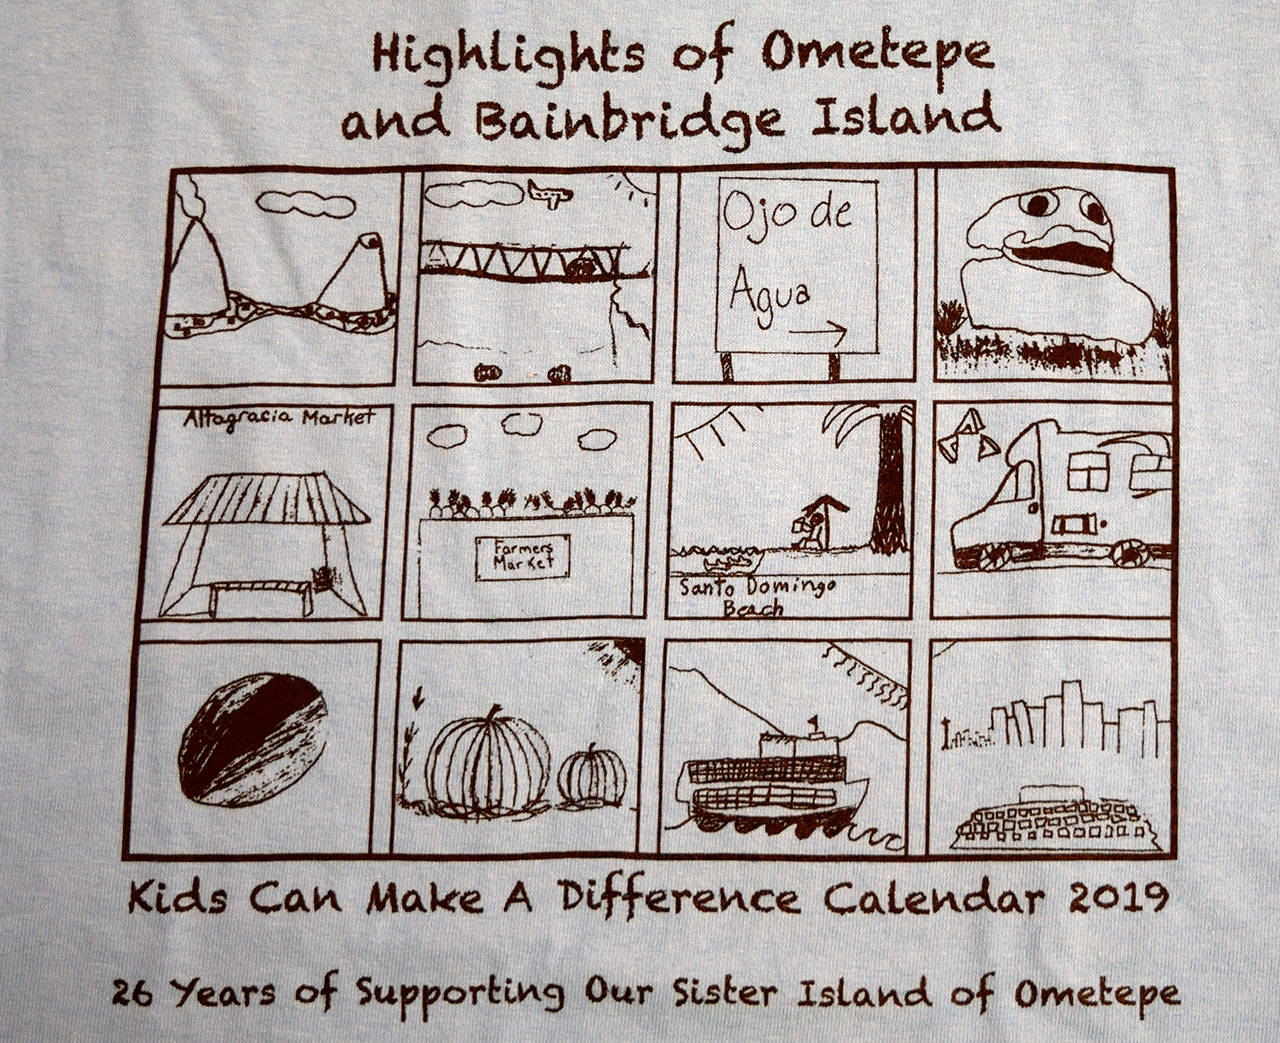 Sale continues for Ometepe calendars